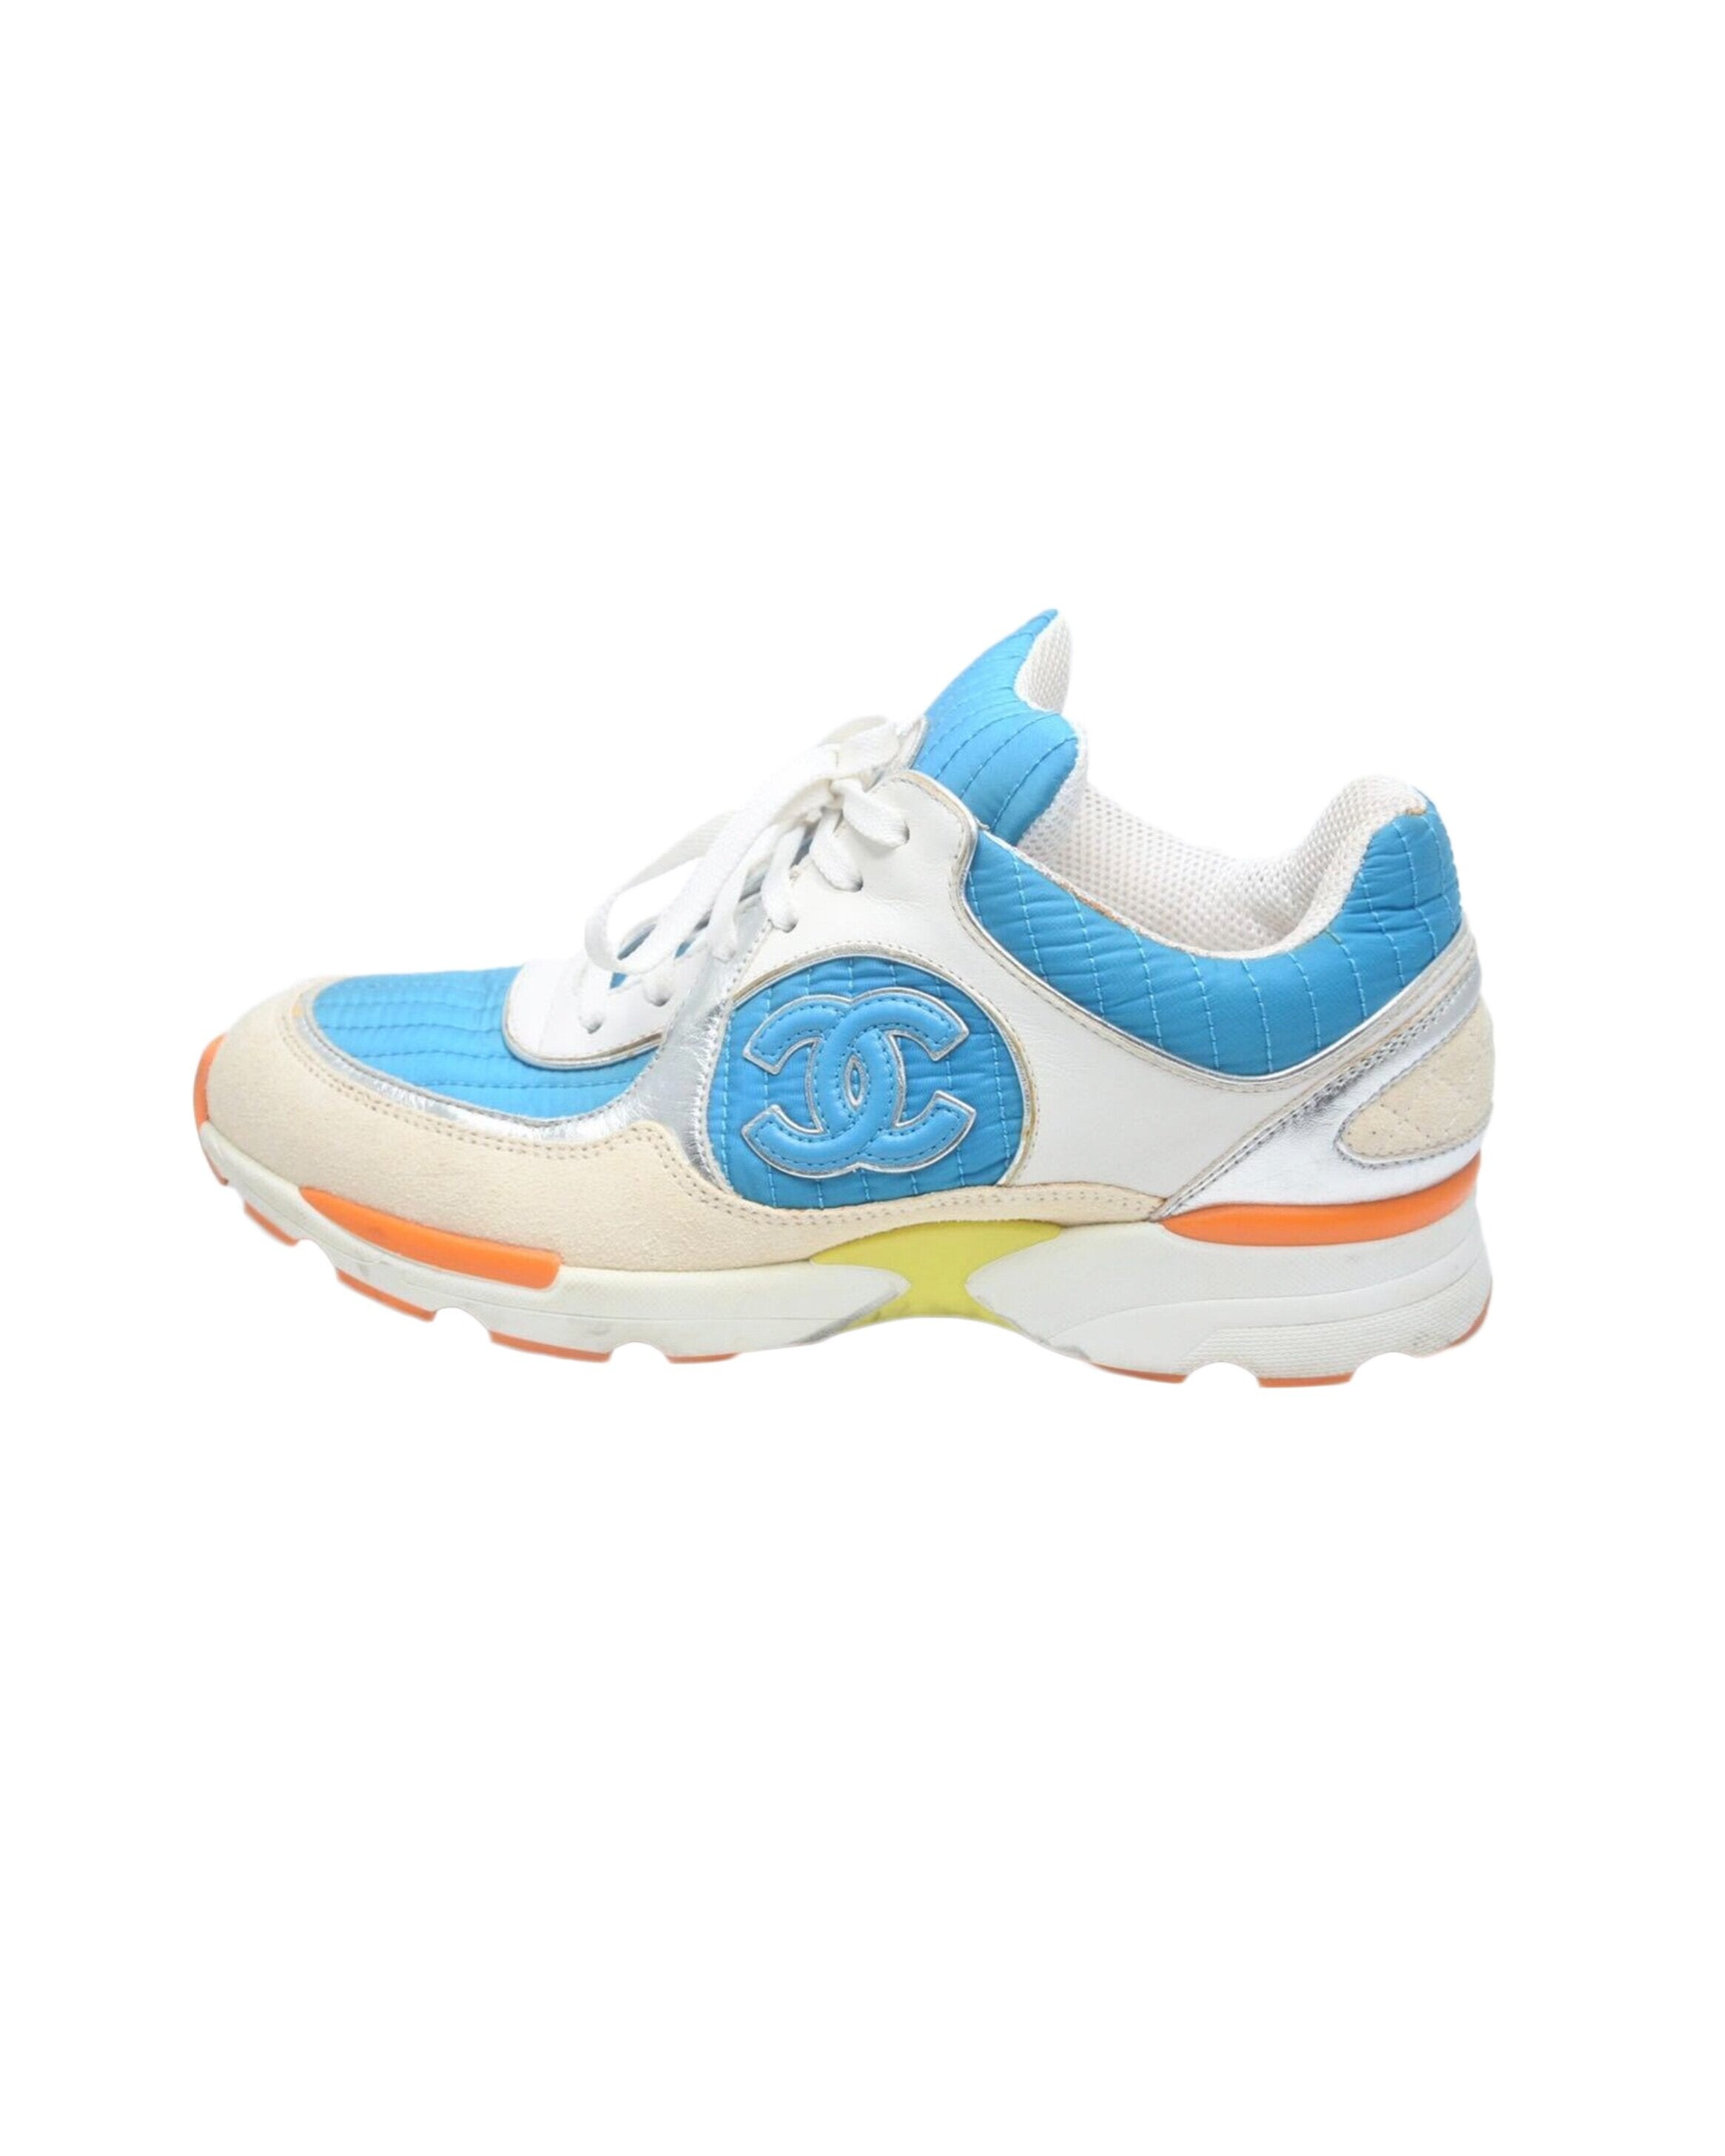 Chanel 2010s Blue Stitched Multicolor Sneakers